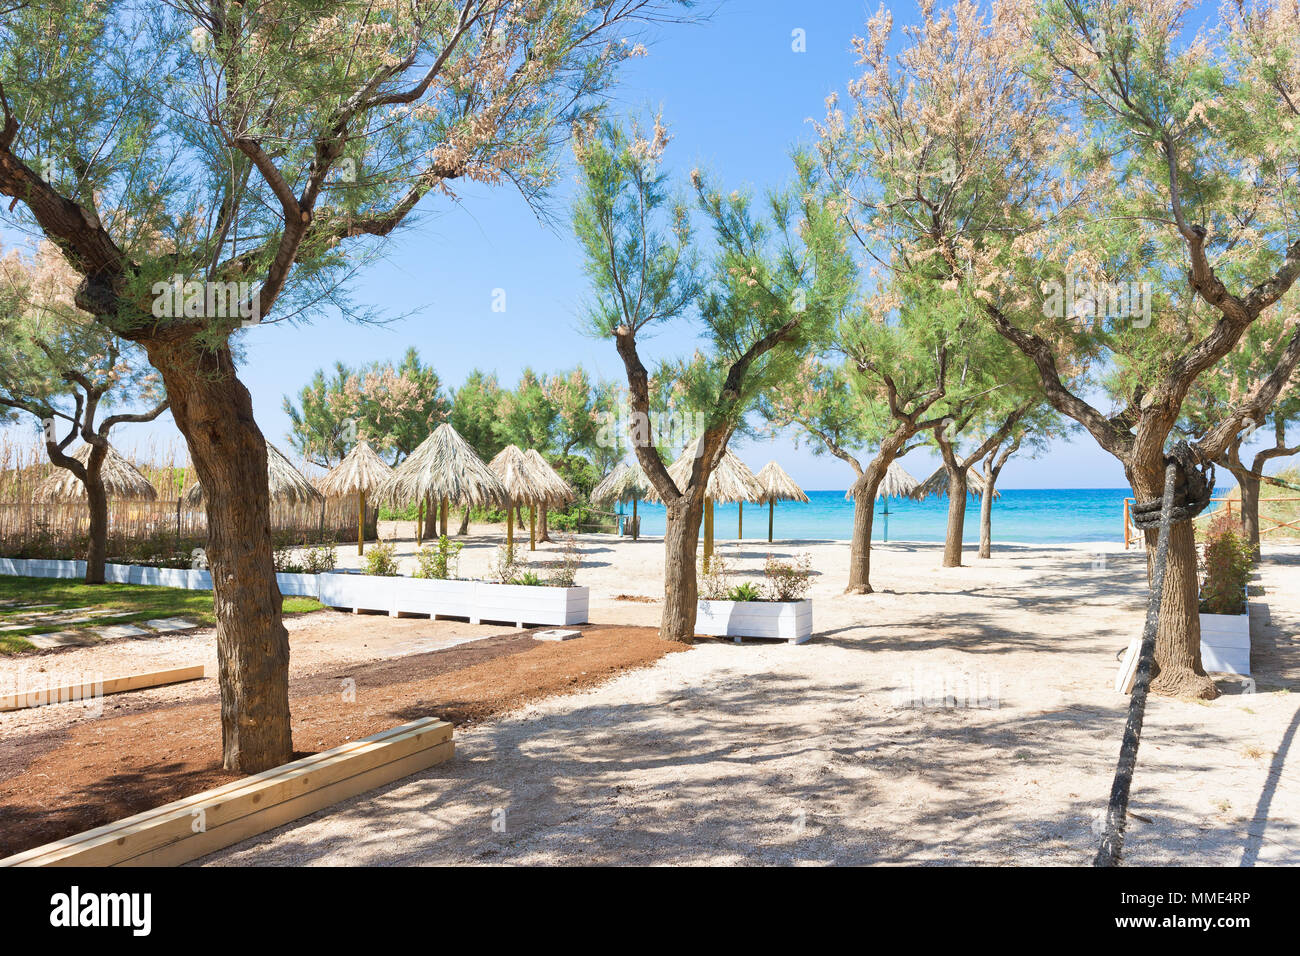 Spiaggia Terme, Apulia, Italy - Trees and sunshades at the beach Stock Photo